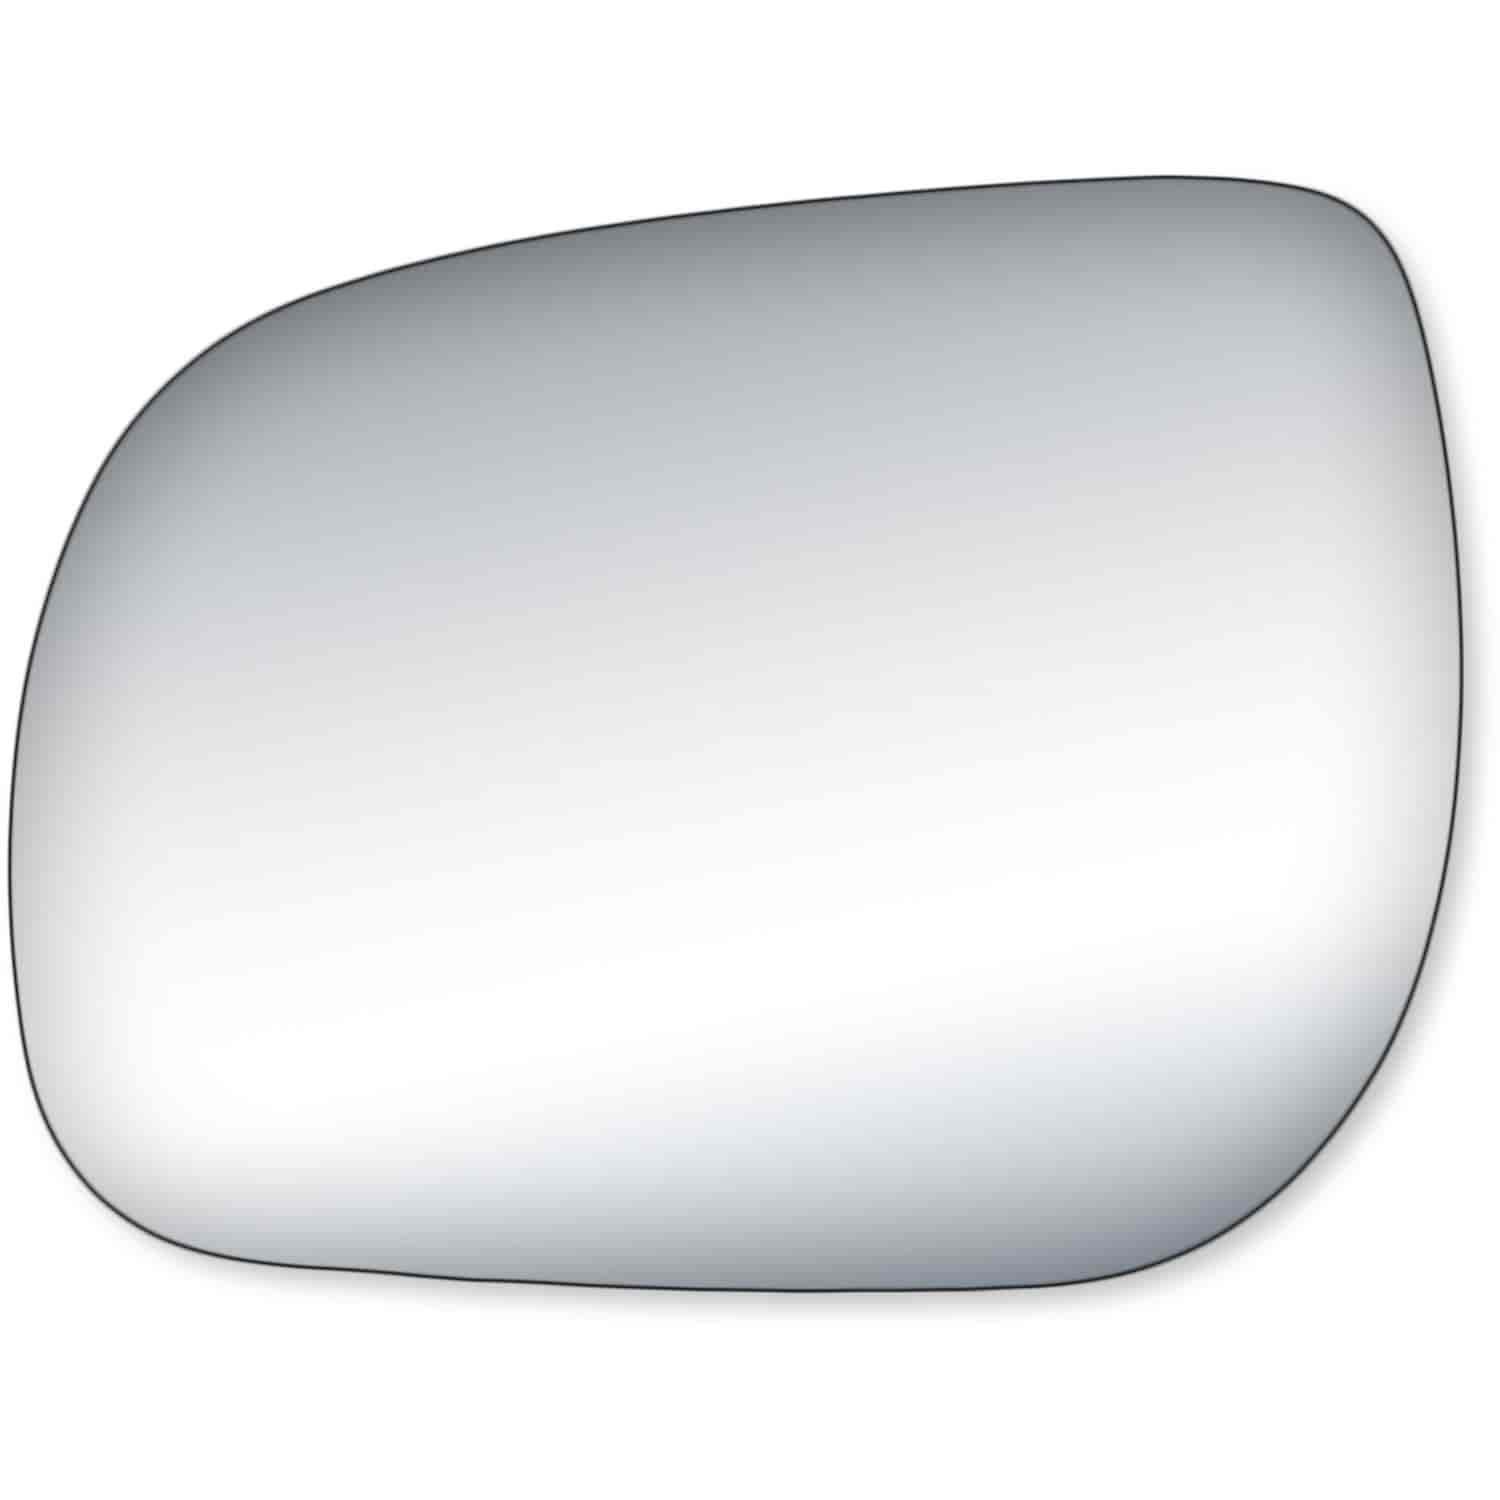 Replacement Glass for 09-12 Rav4 the glass measures 5 3/8 tall by 7 3/16 wide and 7 31/32 diagonally